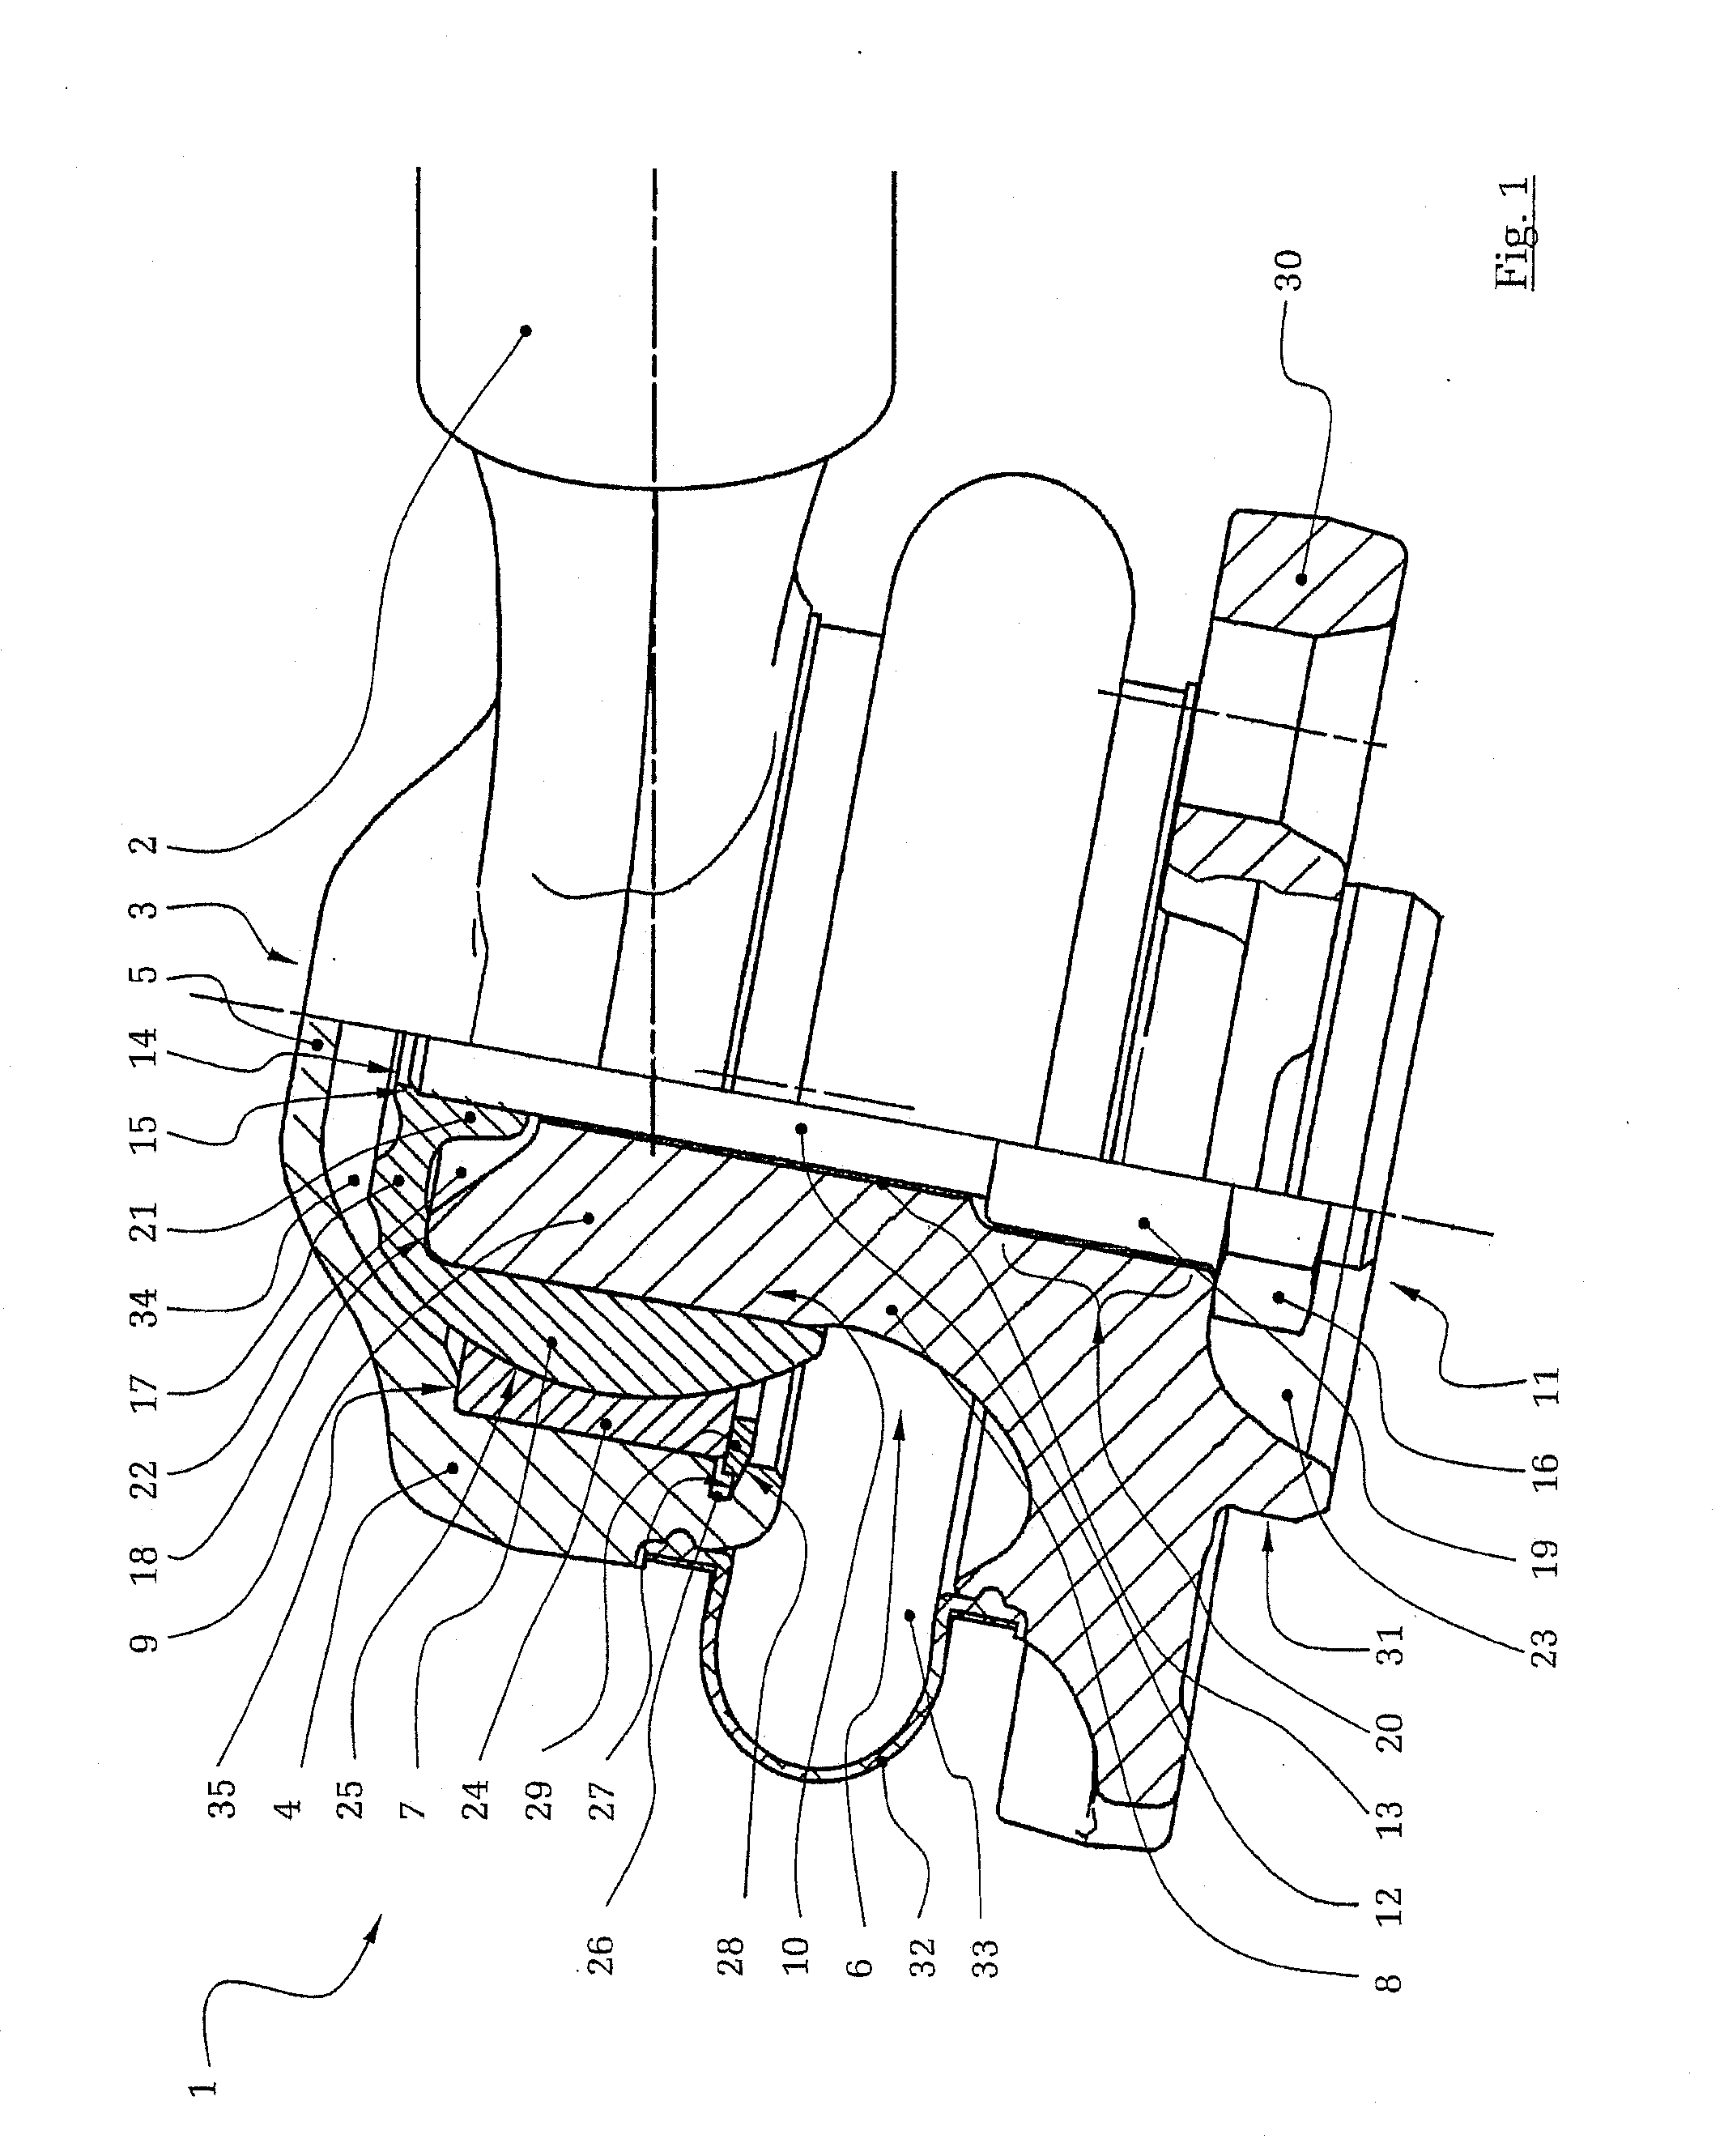 Central joint for a steering triangle of moto vehicles